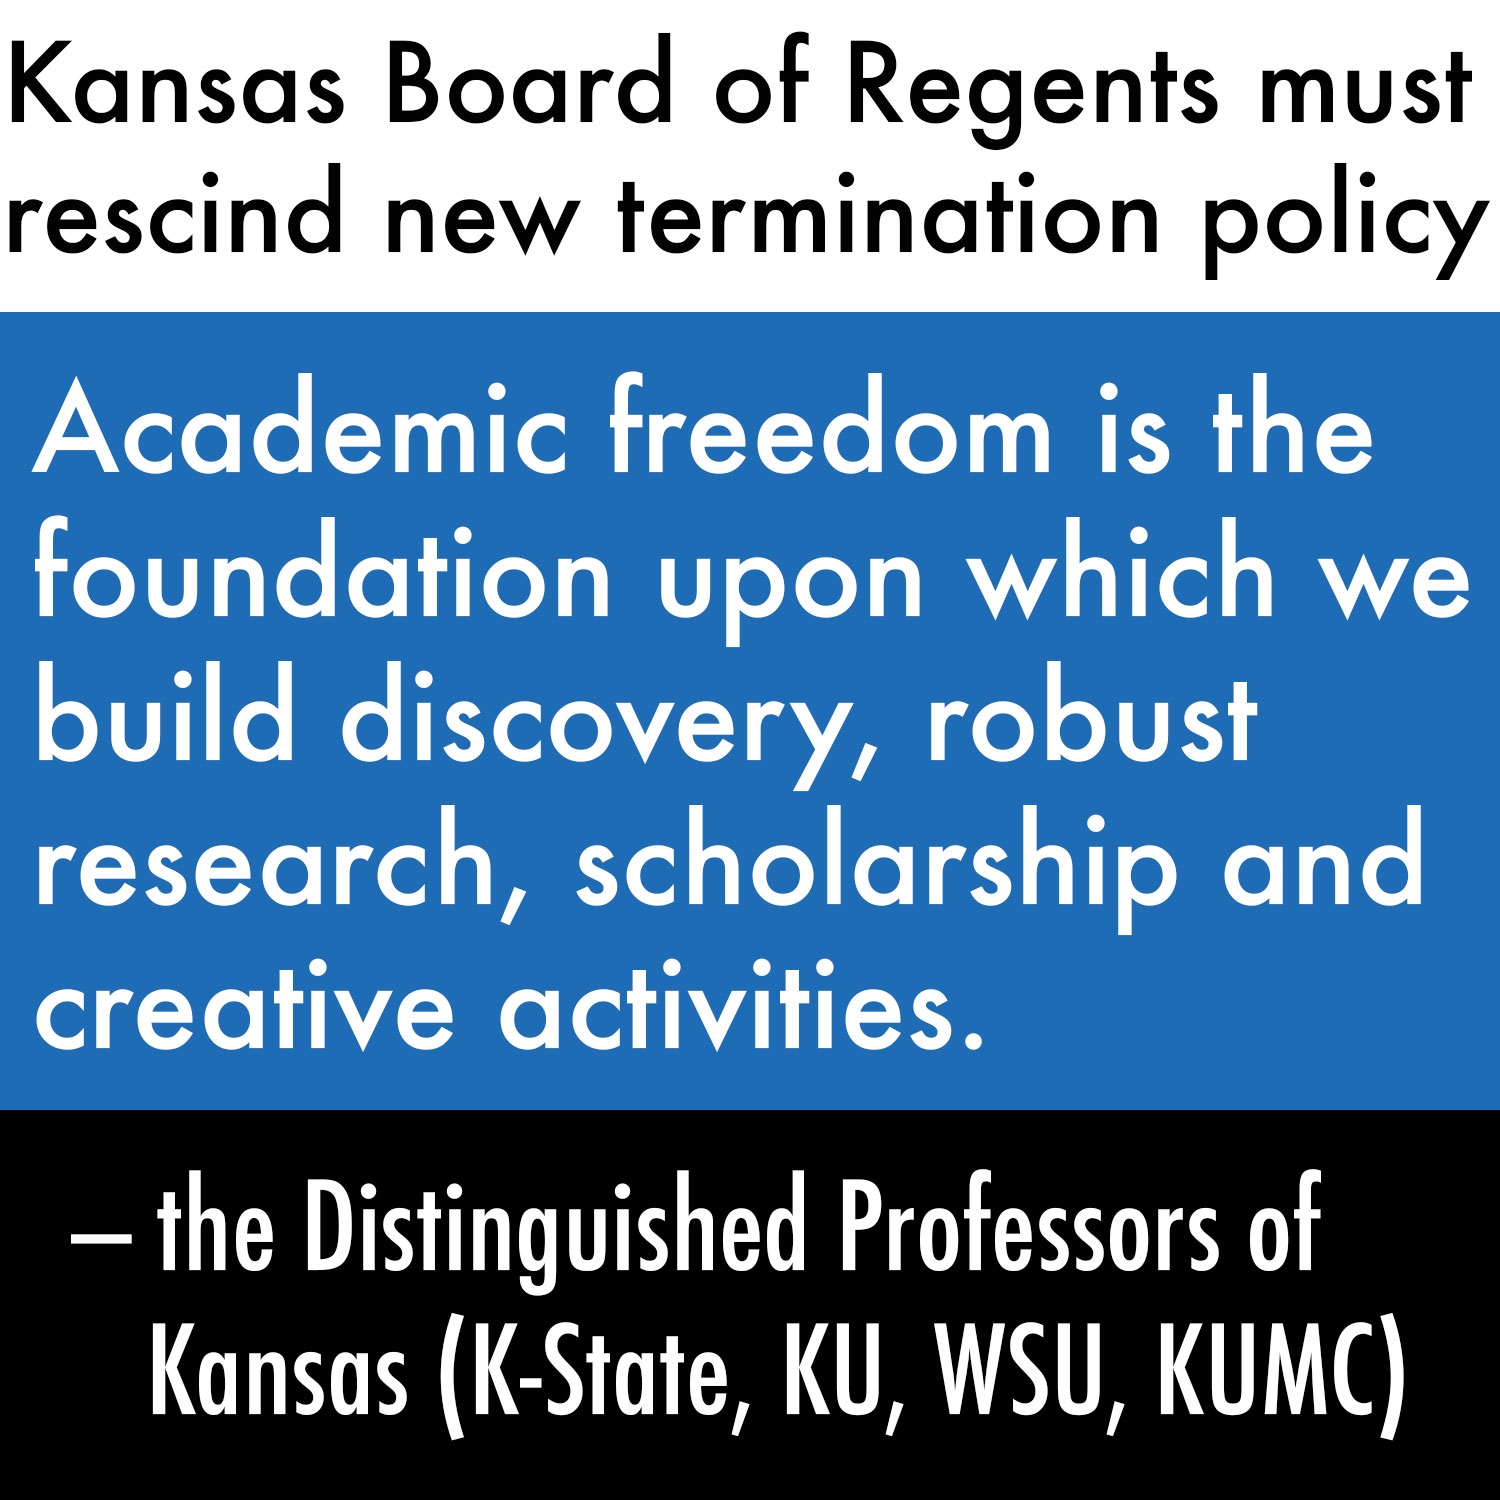 Over 100 Kansas Distinguished Profs to KBOR: Rescind New Termination Policy Immediately.